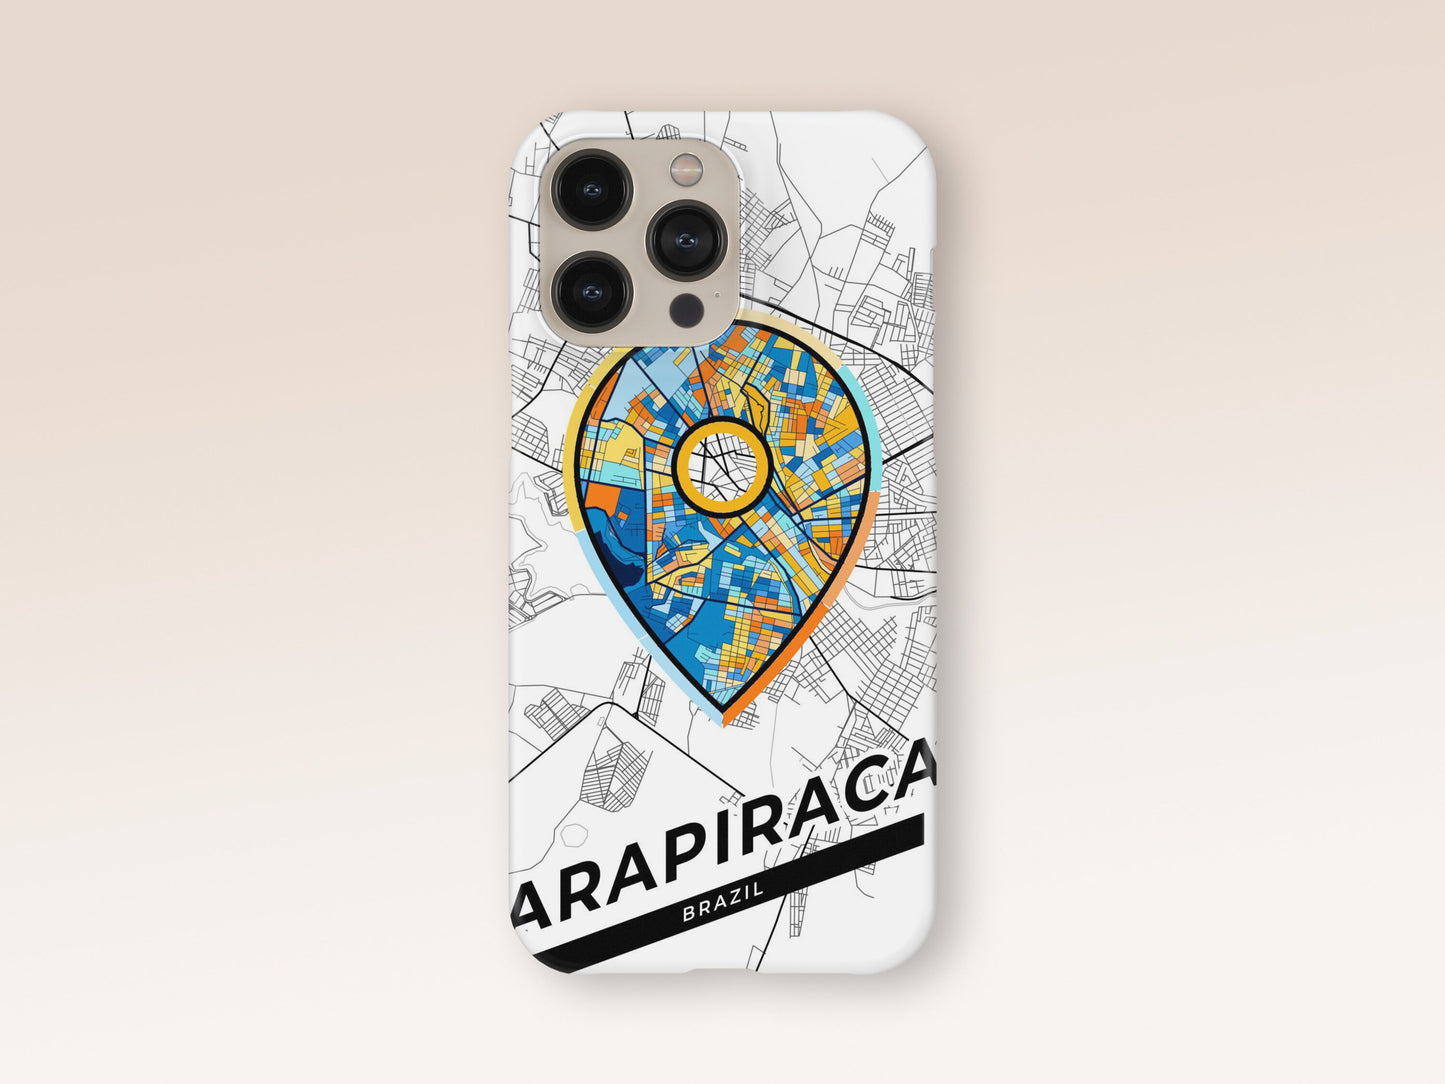 Arapiraca Brazil slim phone case with colorful icon. Birthday, wedding or housewarming gift. Couple match cases. 1